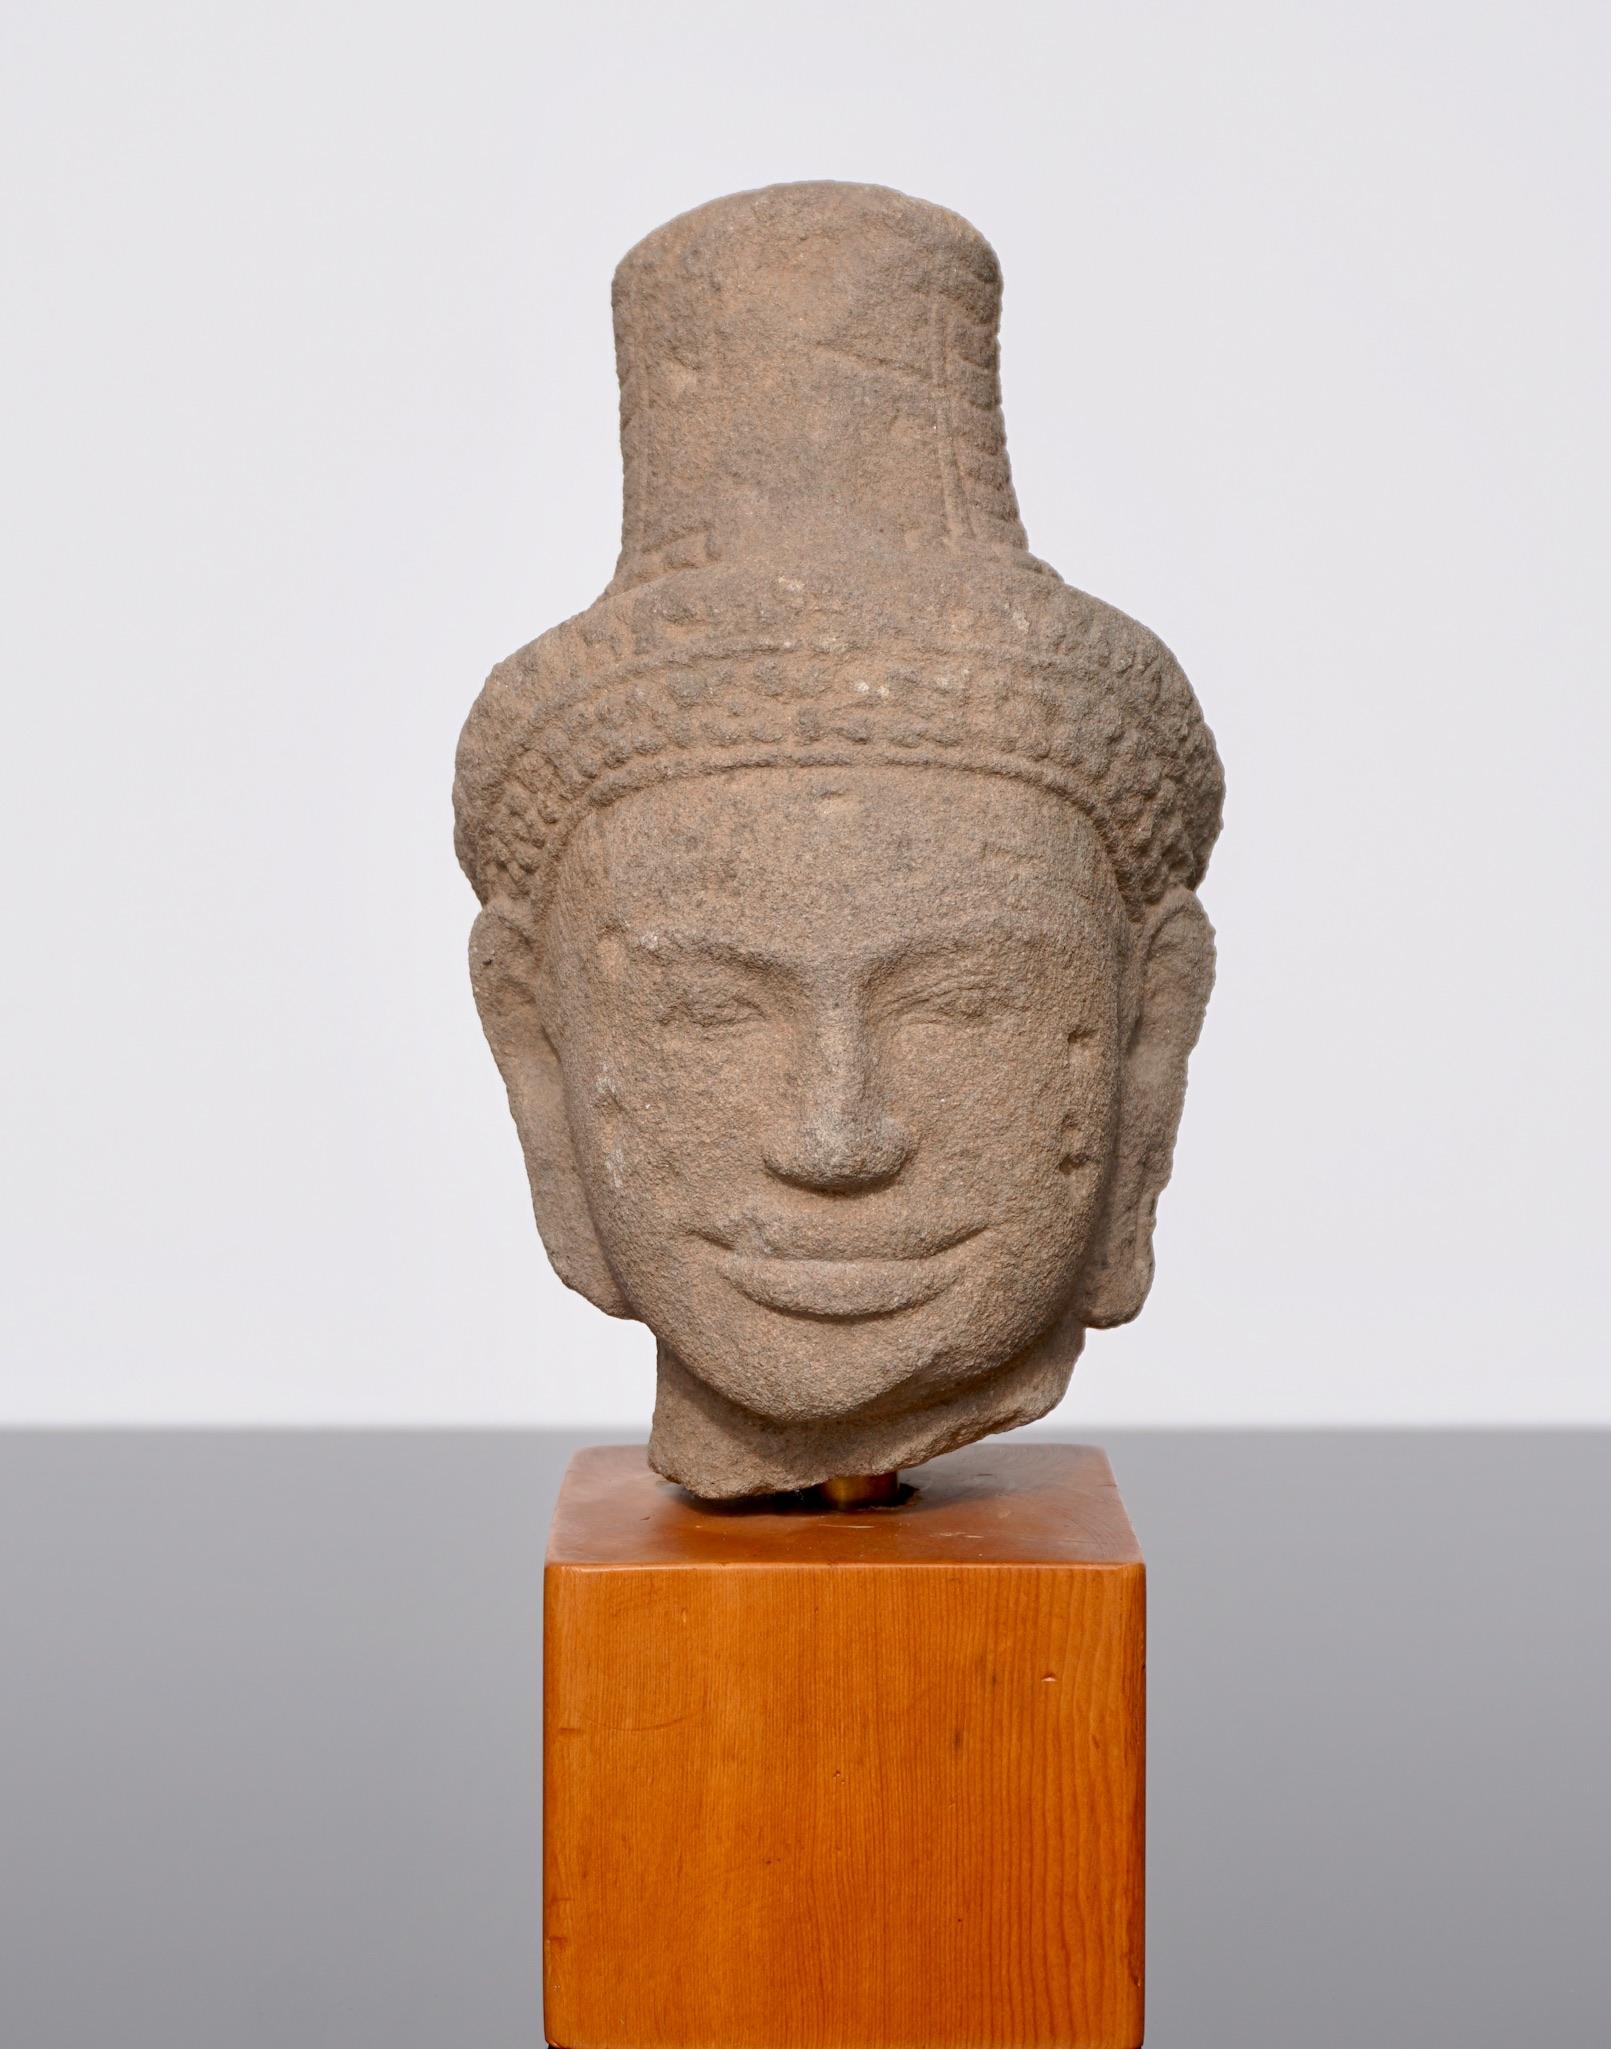 A sandstone figure head of Shiva Khmer, Baphuon style, circa 11th century. A rare Khmer gray sandstone head of Shiva. The handsome head of the divinity deity Shiva. His face with serene expression, almond-shaped eyes, ridged eyebrows and elongated